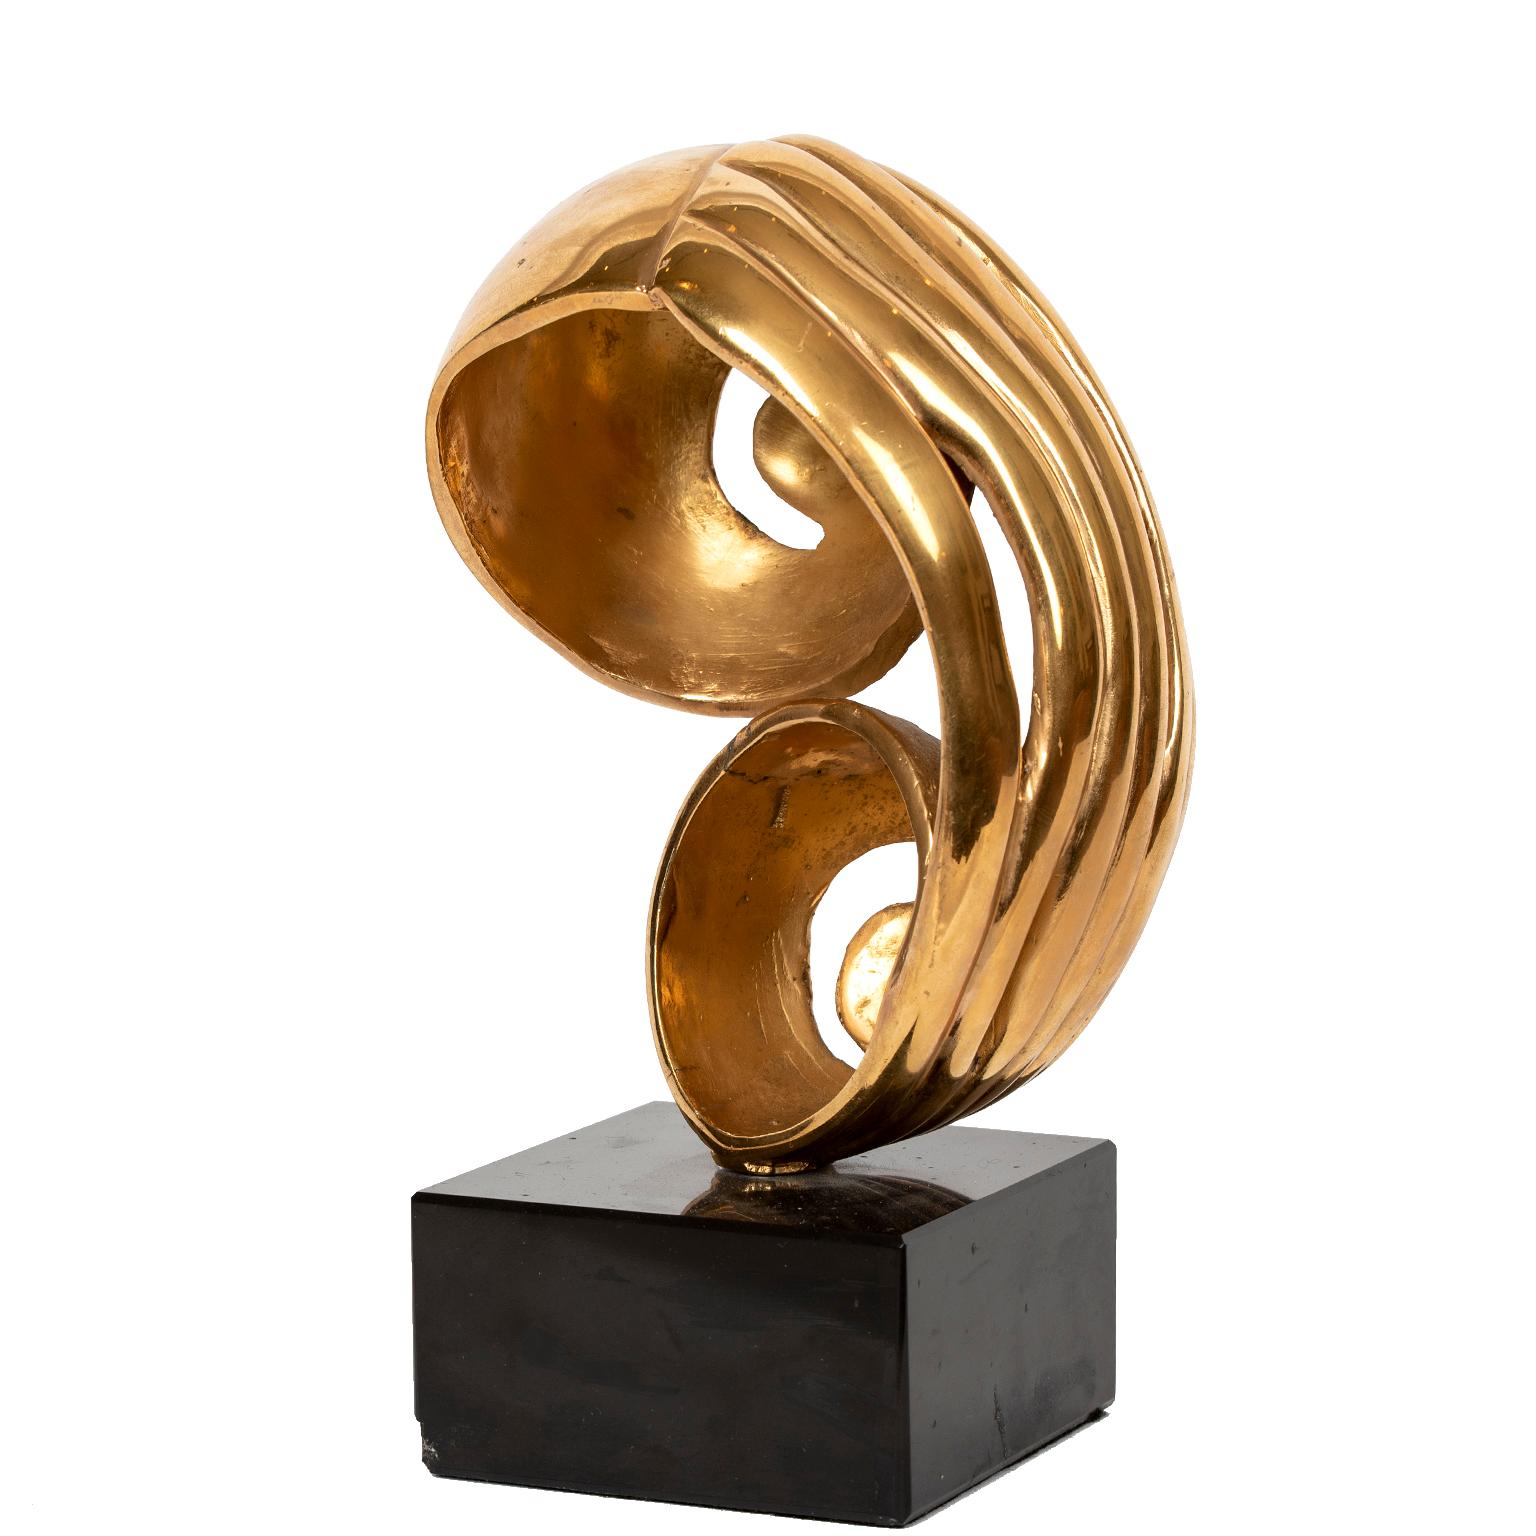 Cast Bronze Abstract on Stand by Jack Culiner